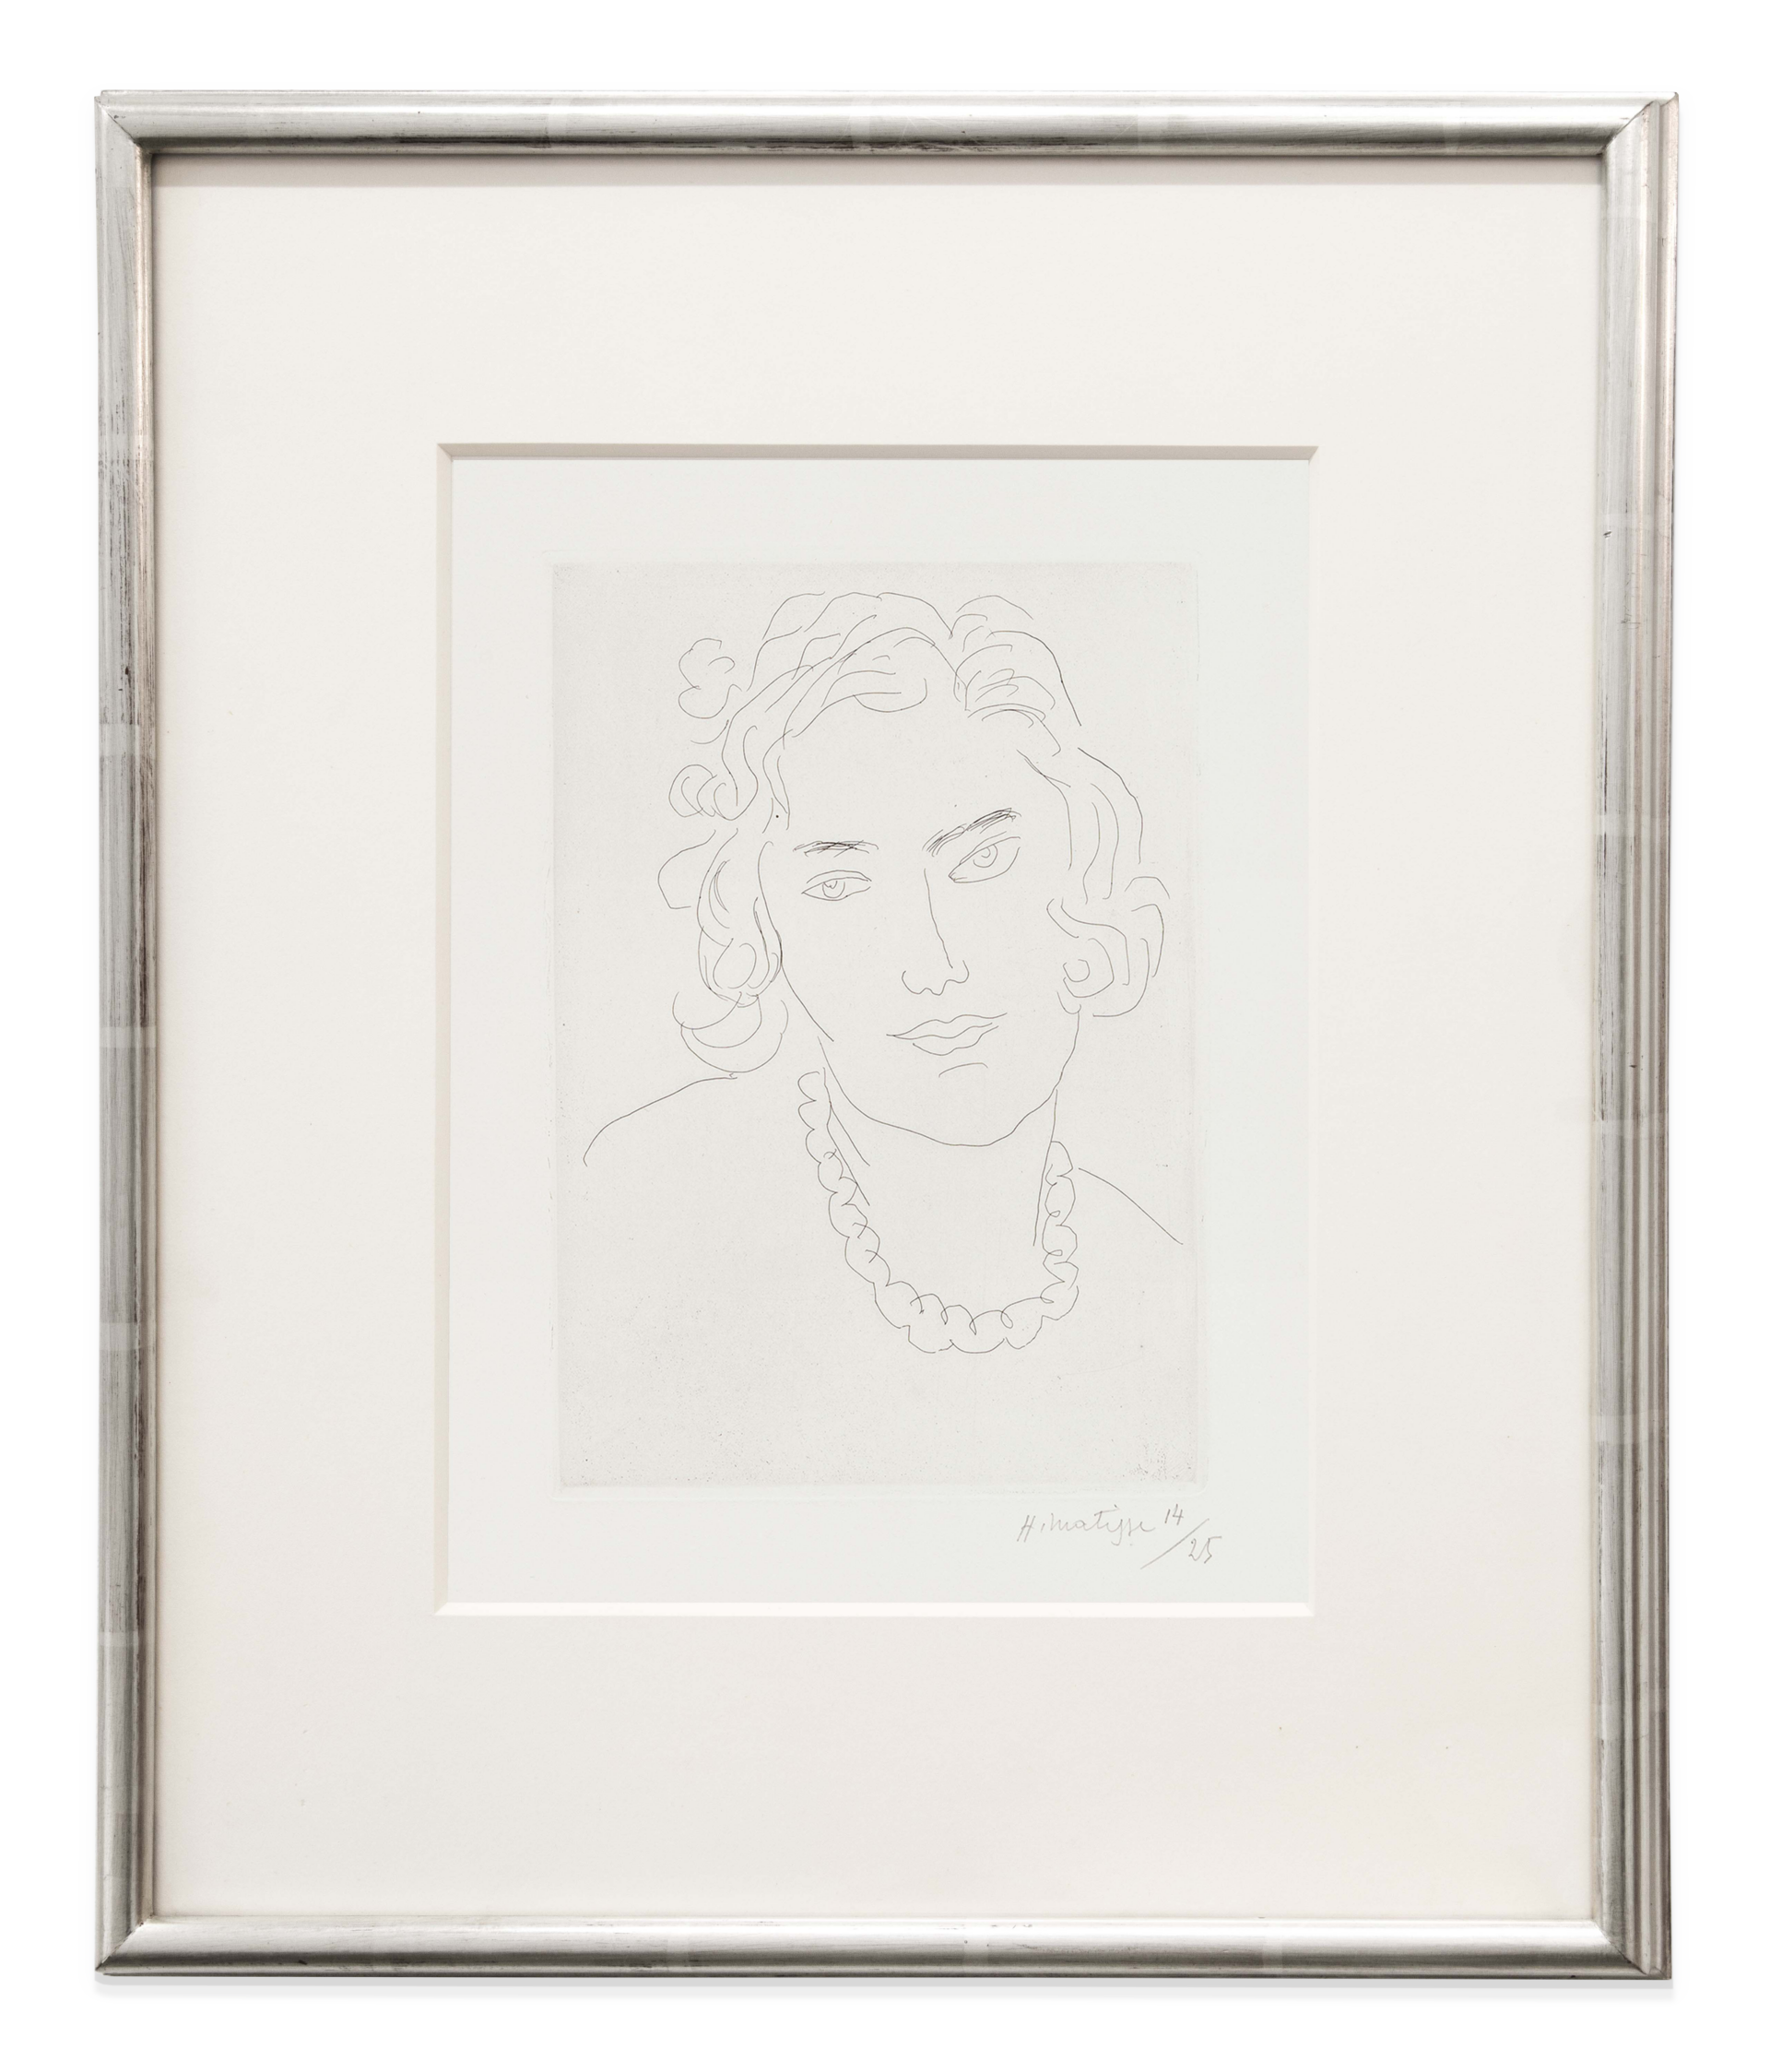 Henri Matisse Le Grand Collier, 1929 Etching Image Dimensions: 9 3/4 x 7 inches (24.8 x 17.8 cm) Paper Dimensions: 15 x 11 inches (38.1 x 27.9 cm) Framed Dimensions: 19 11/16 x 16 5/8 x 1 1/16 inches (50 x 42.2 x 2.7 cm) Edition of 25